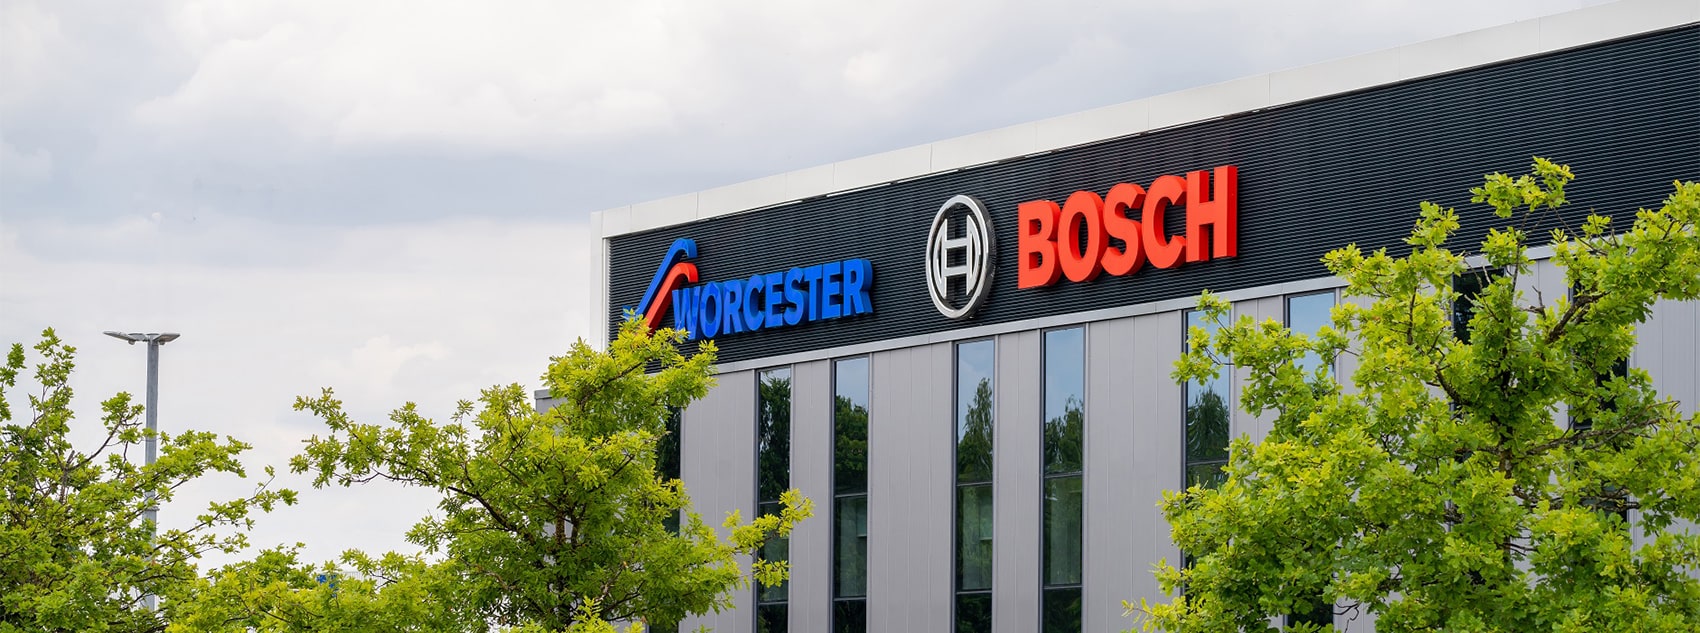 Worcester Bosch Head office sign outside